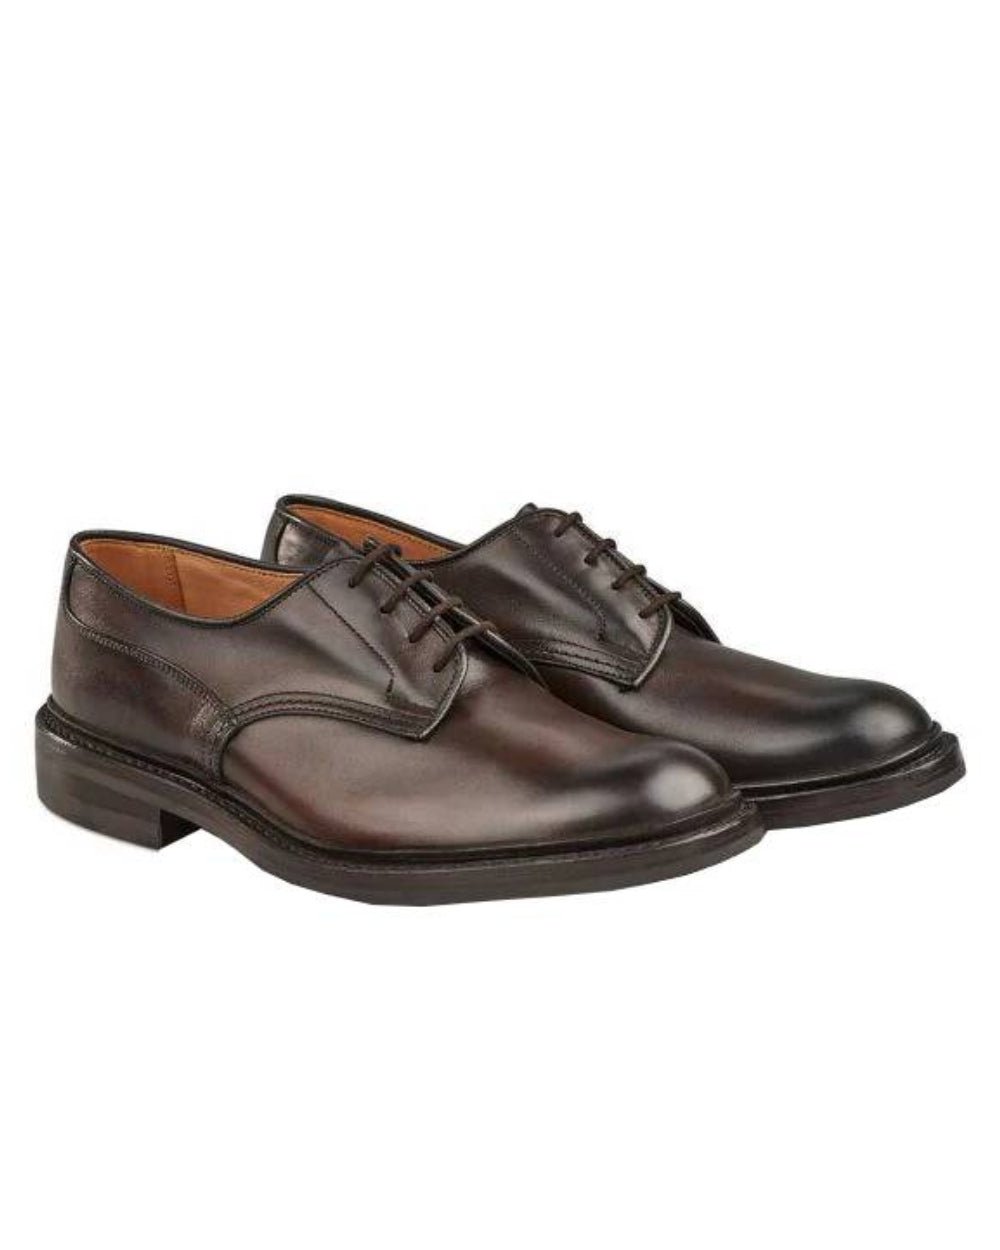 Espresso Burnished Coloured Trickers Woodstock Plain Derby Shoe Dainite Sole On A White Background 